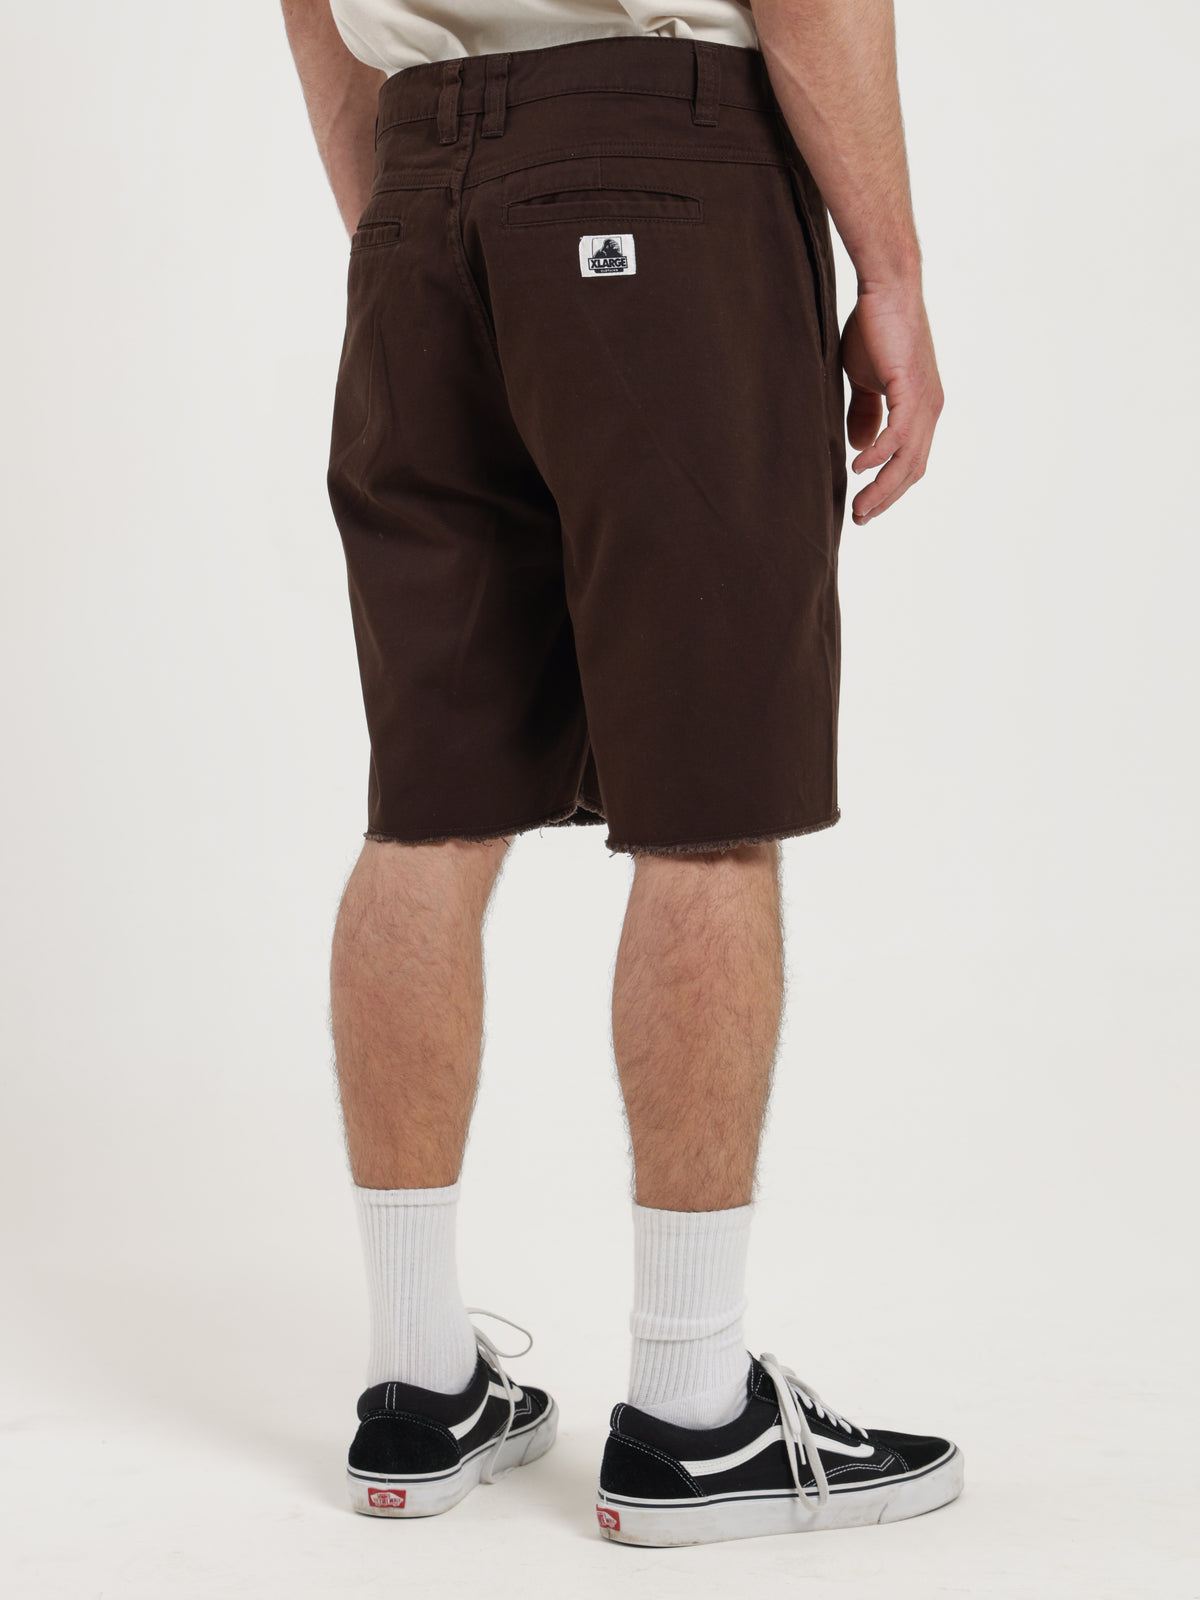 91 Work Shorts in Brown